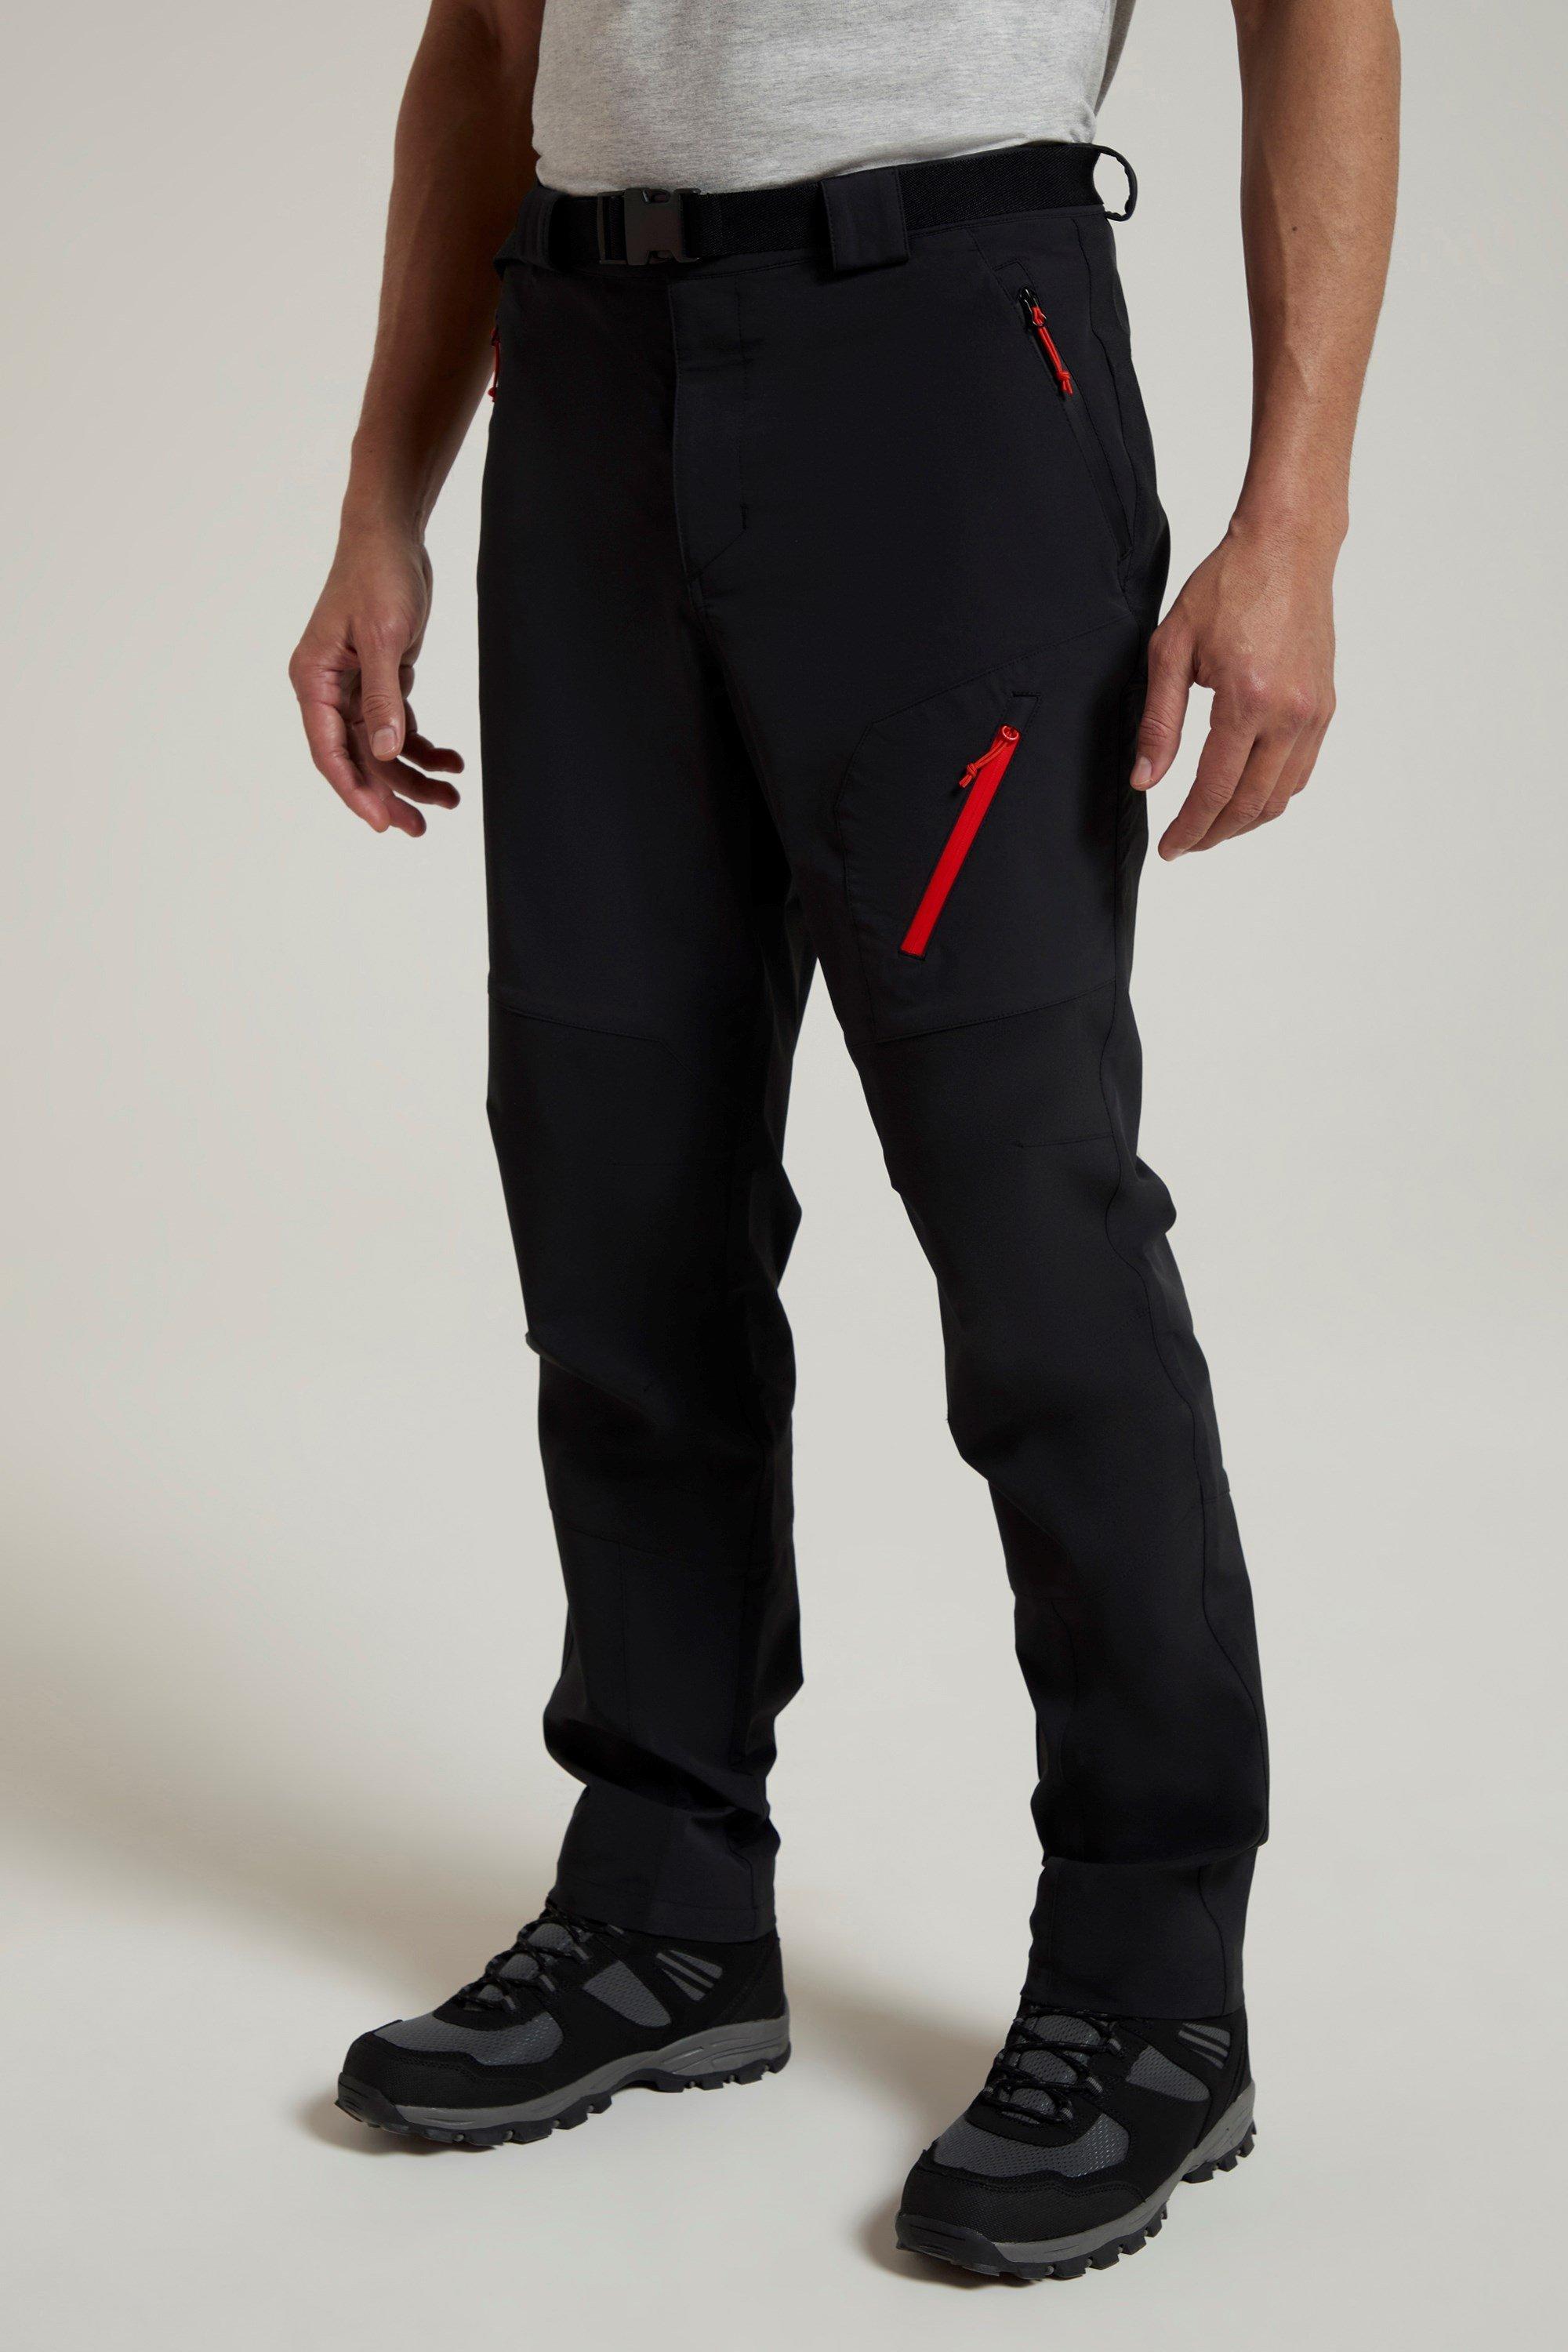 Forest Mens Water-Resistant Trekking Trousers